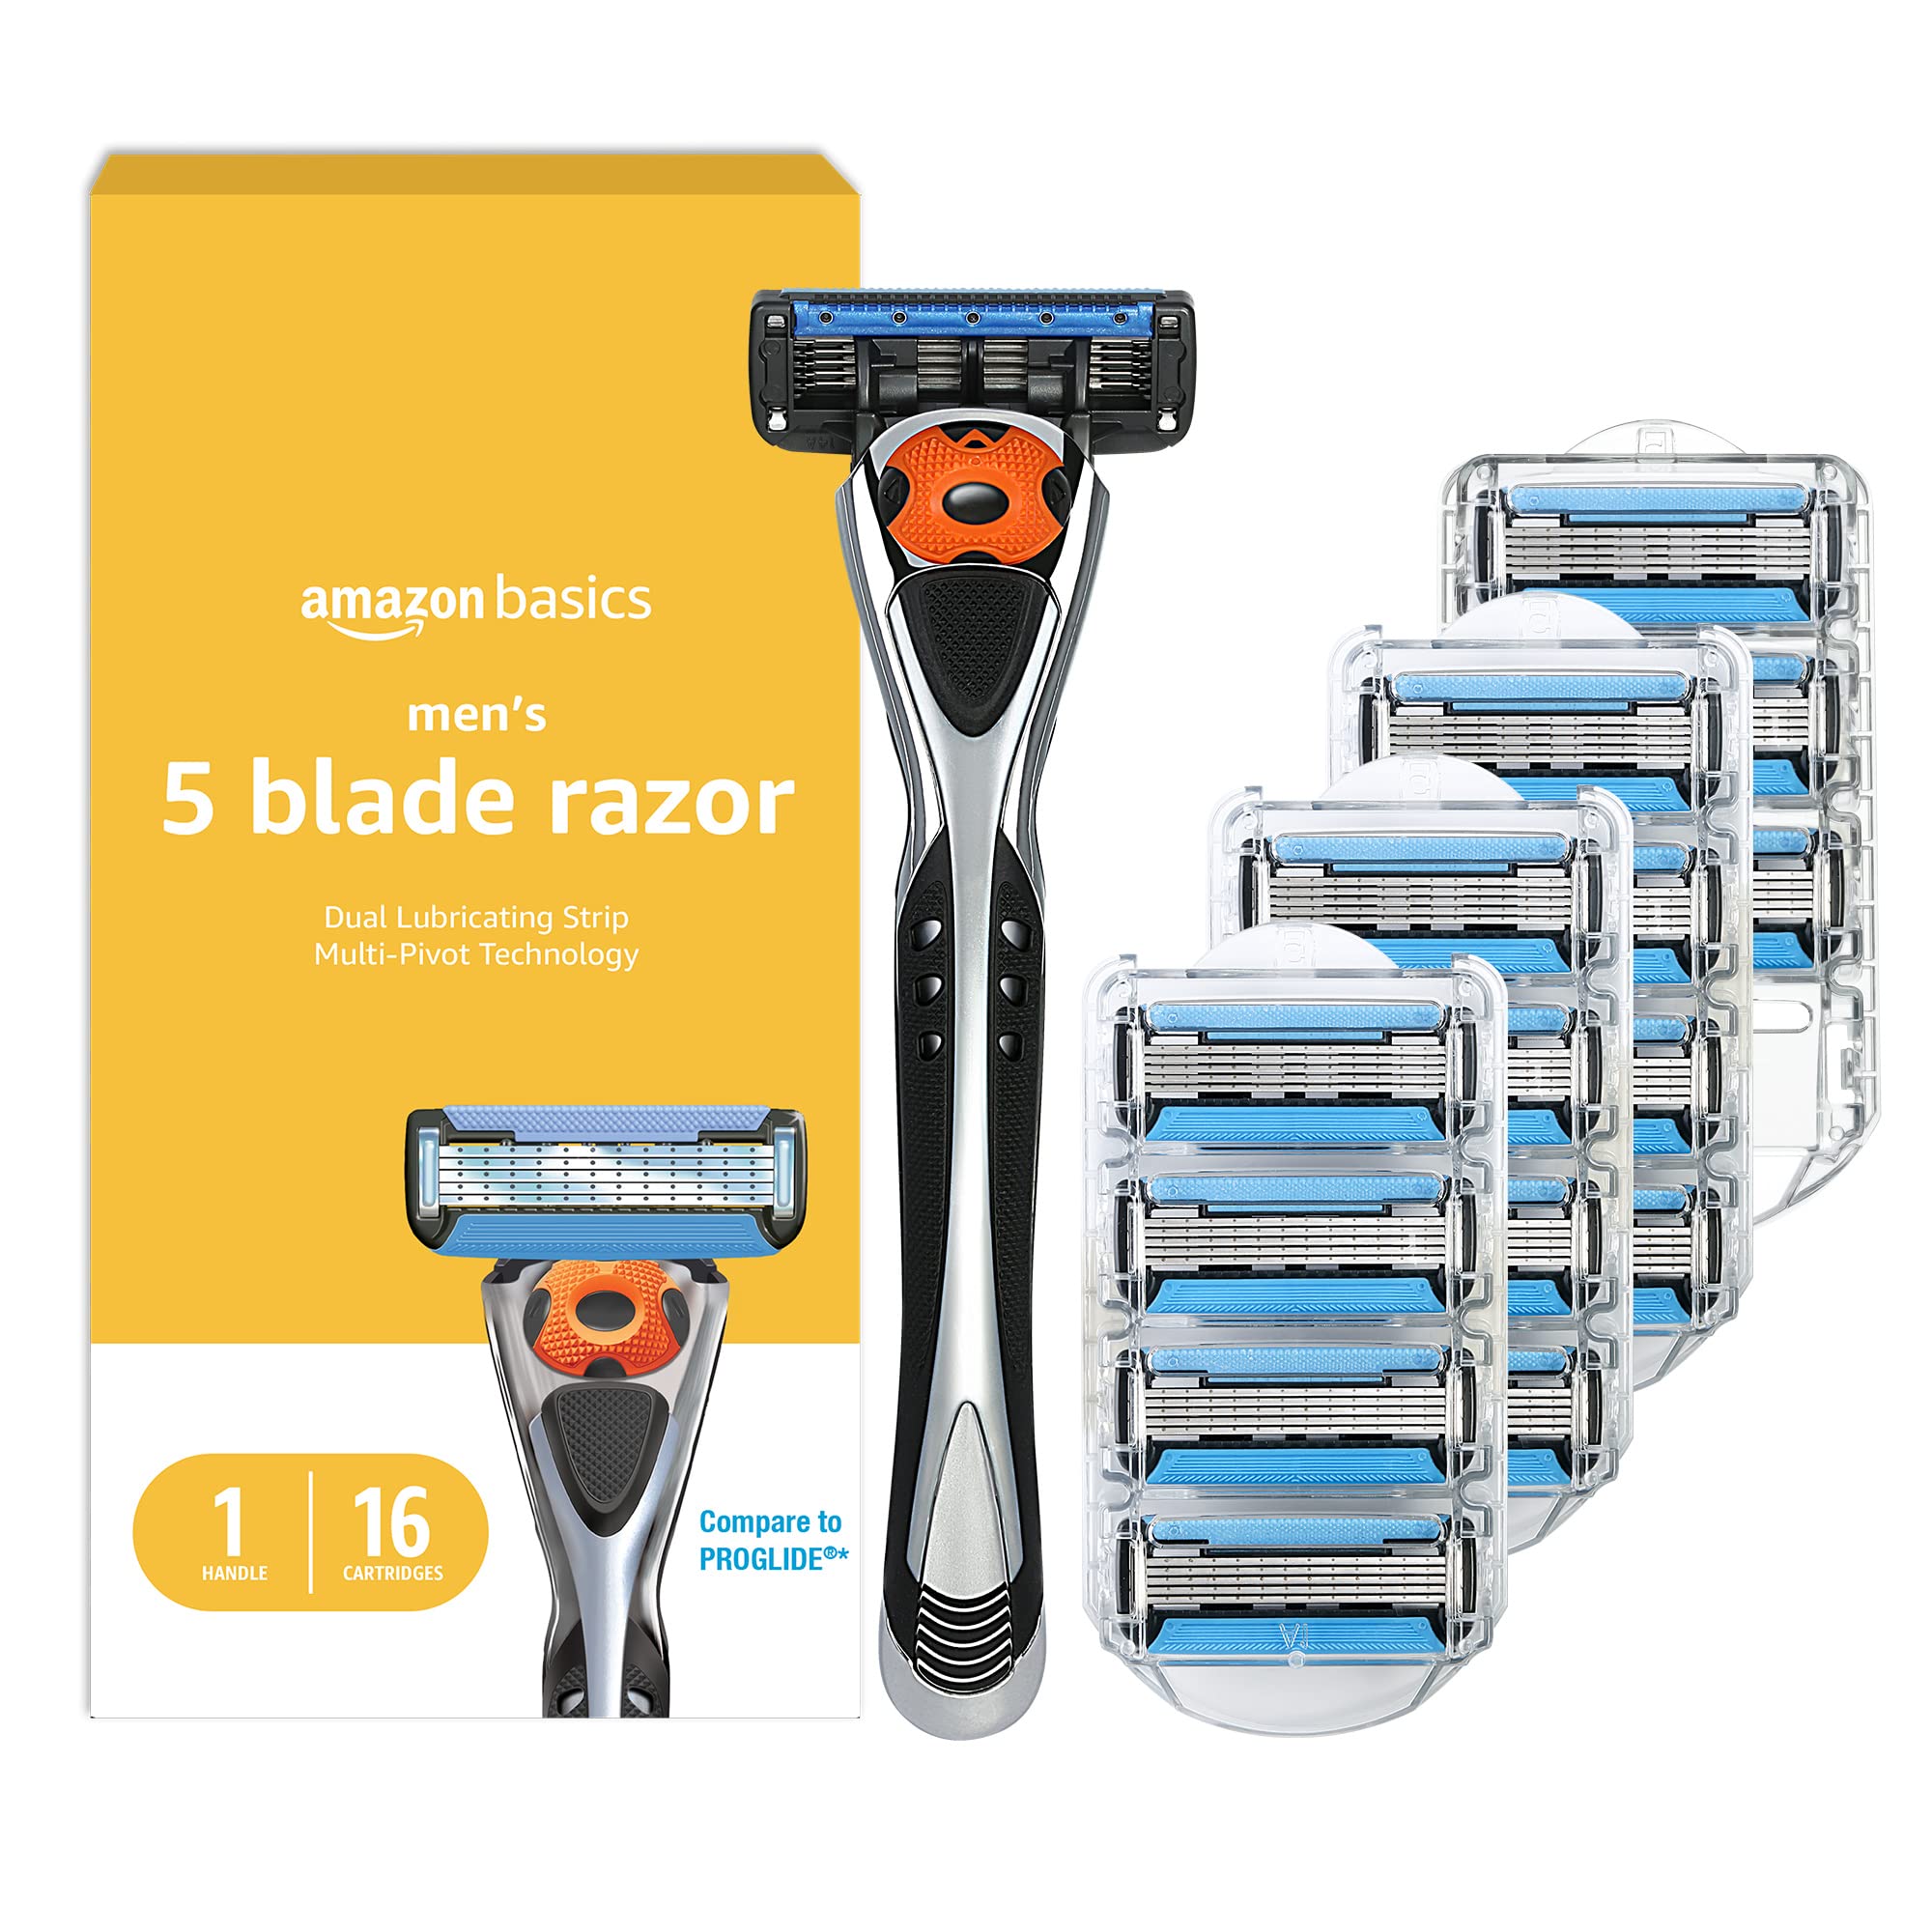 Book Cover Amazon Basics 5-Blade MotionSphere Razor for Men with Dual Lubrication and Precision Trimmer, Handle & 16 Cartridges, Cartridges fit Amazon Basics Razor Handles only, 17 Piece Set, Black Handle + 16 Refills (Razor)